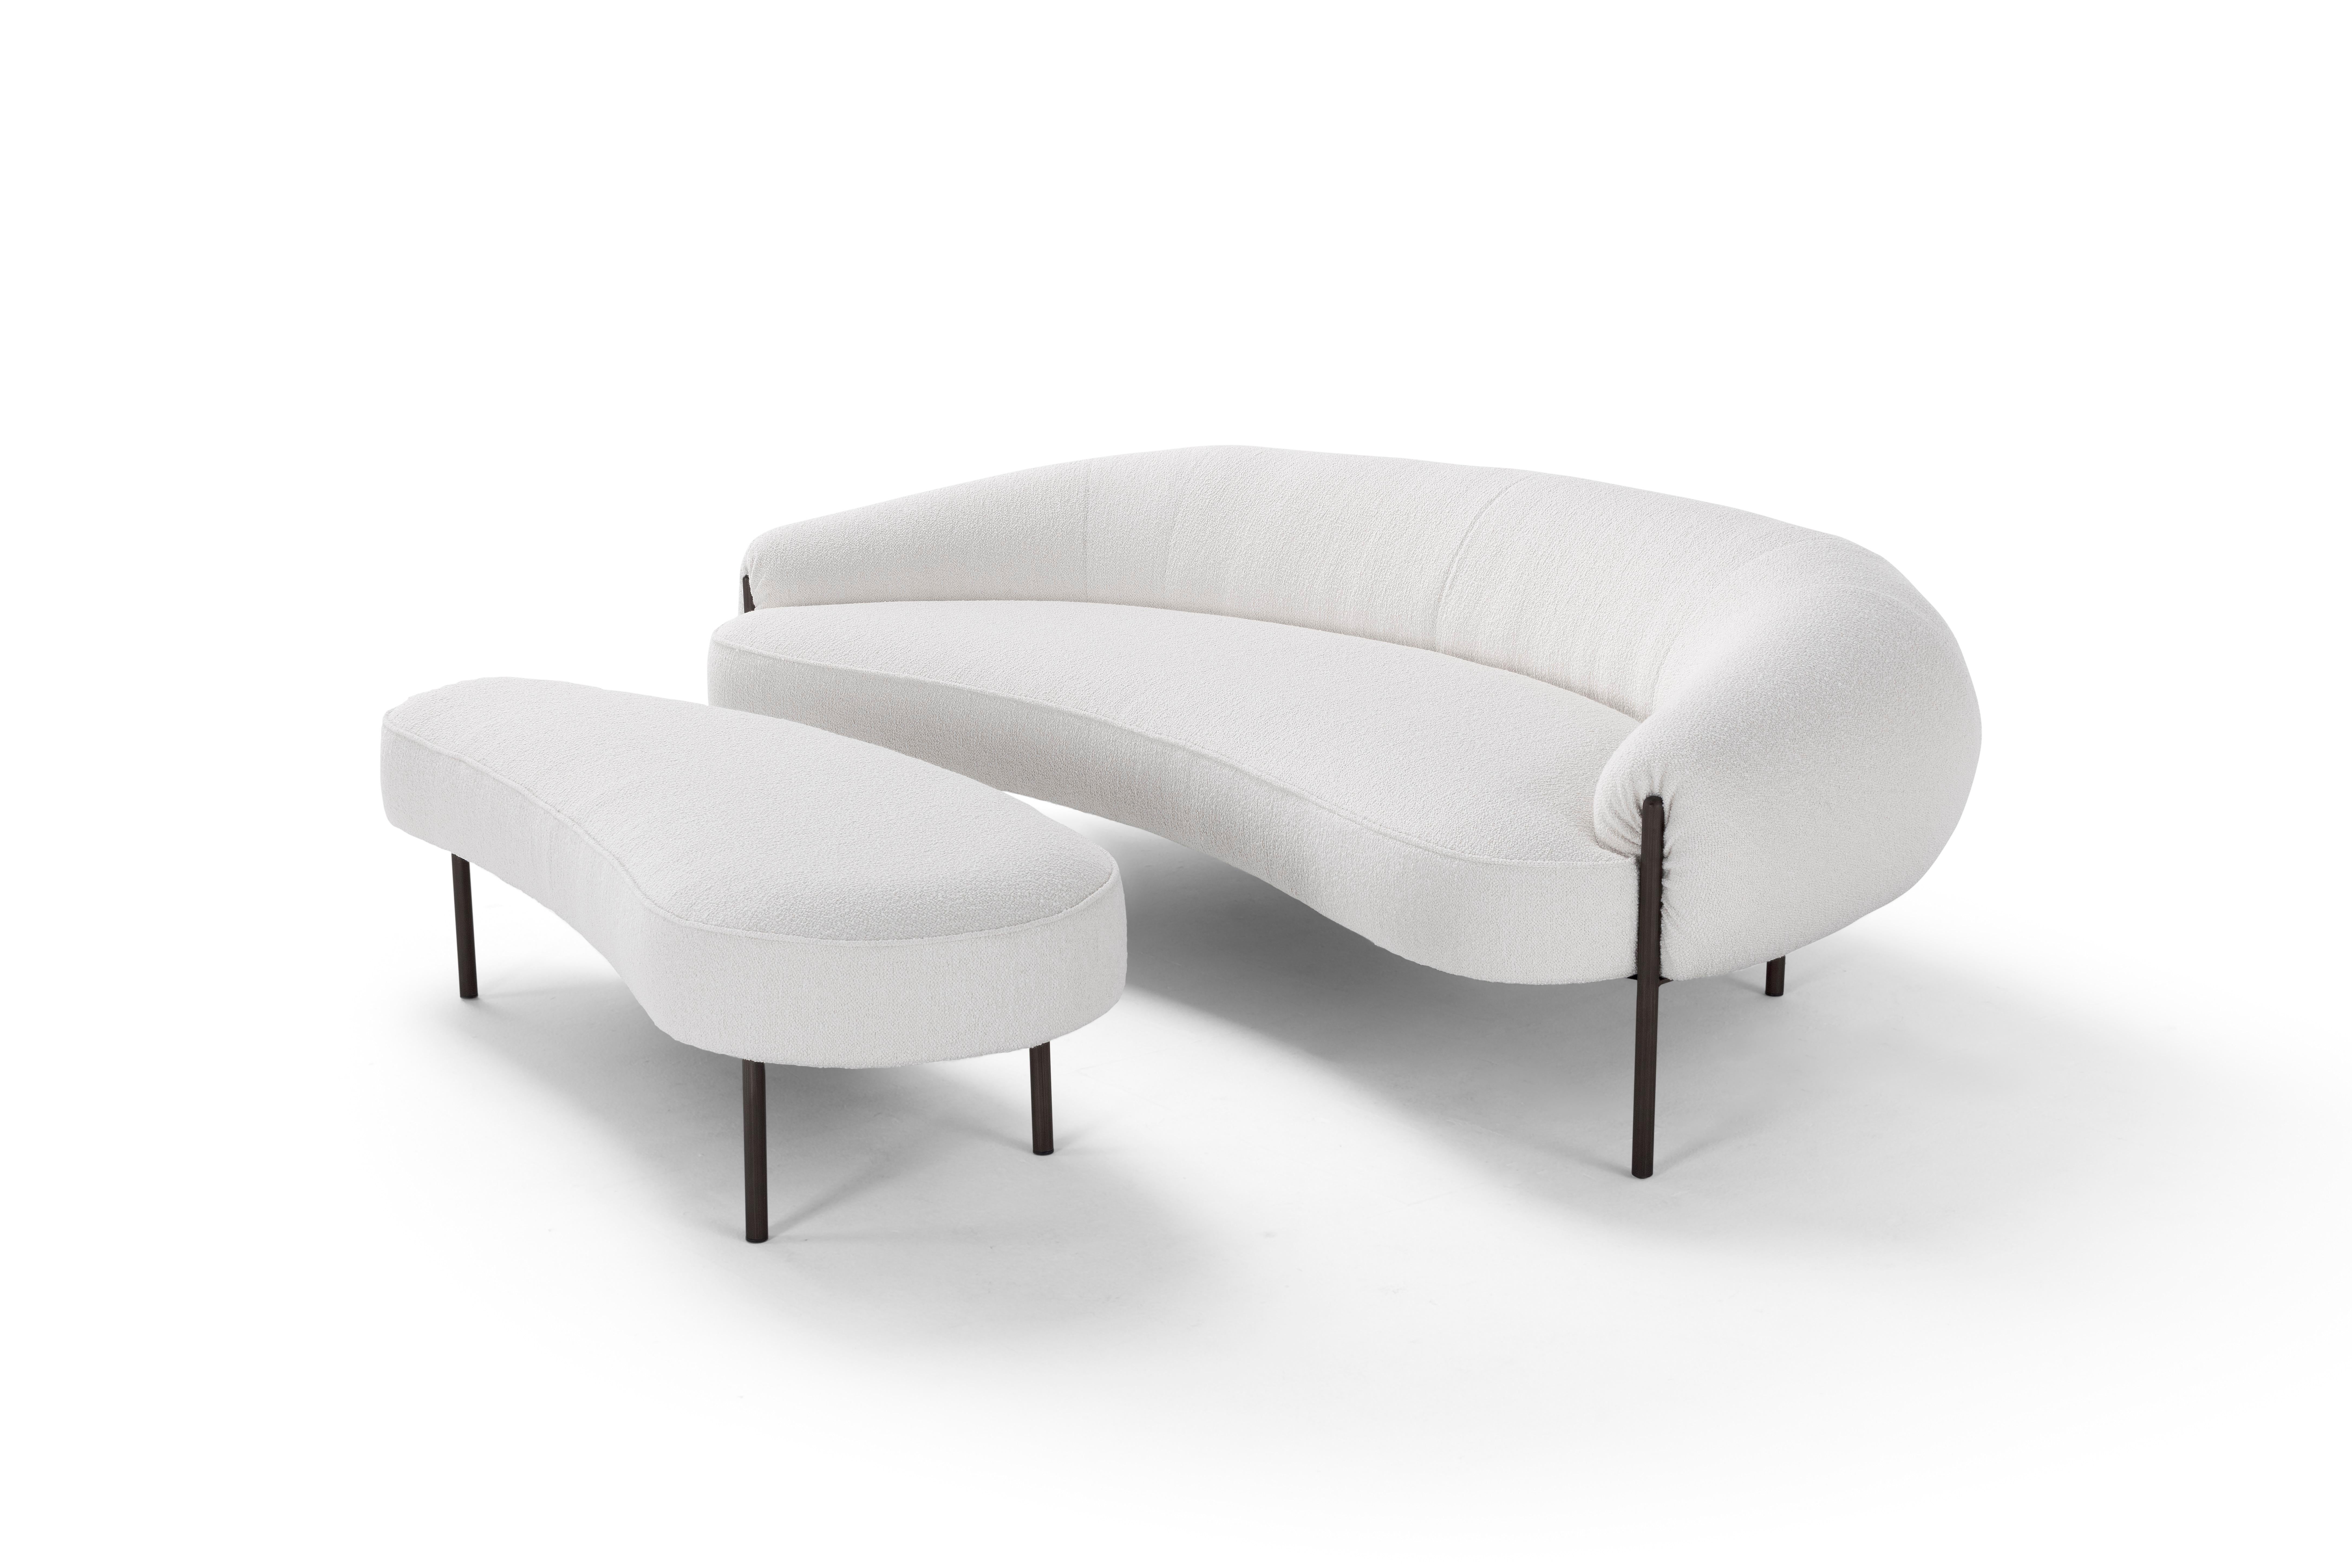 Organic Modern Contemporary Sofa 'Isola' by Amura Lab, Ortisei 01 For Sale